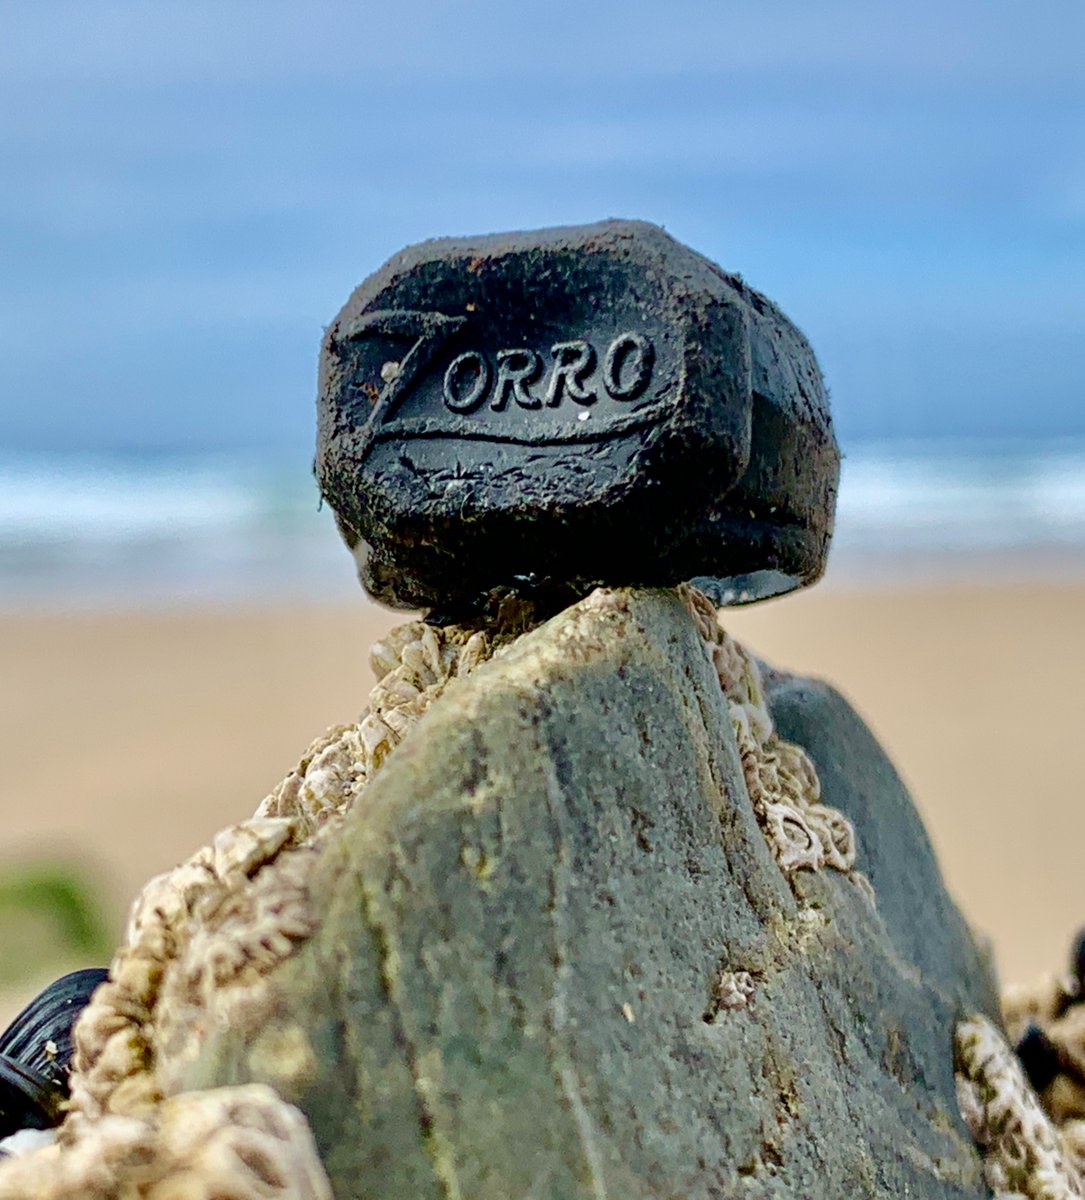 This Zorro ring was given away in packets of Quaker Puffed Wheat in 1959. Some 60 years later we found it on a Cornish beach, washed out of the sand after a storm. #plasticheritage #contemporaryarchaeology #Anthropocene